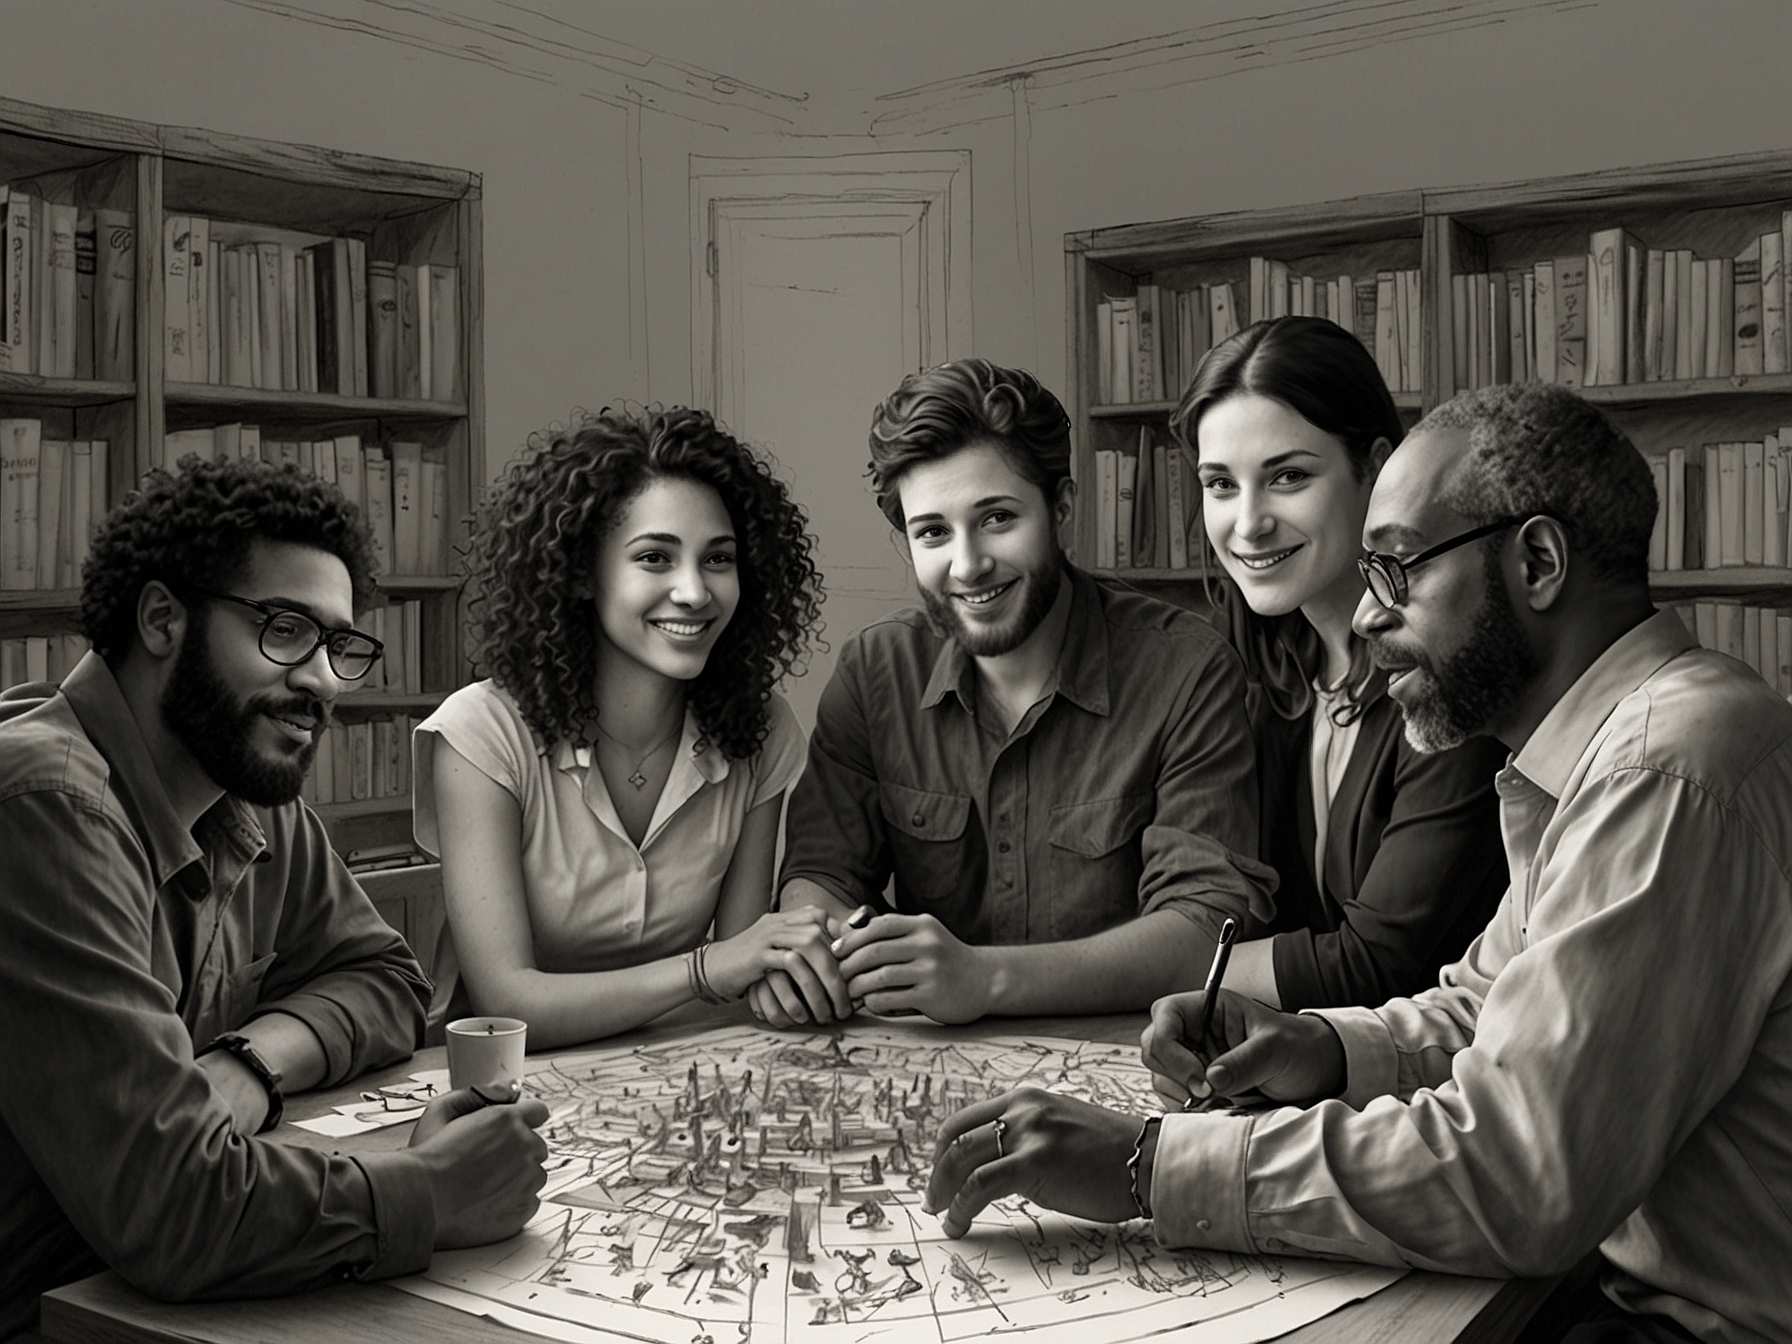 The second image depicts a diverse group of filmmakers brainstorming around a table, representing the collaboration and diversity of perspectives within the Jewish Story Partners' supported projects.